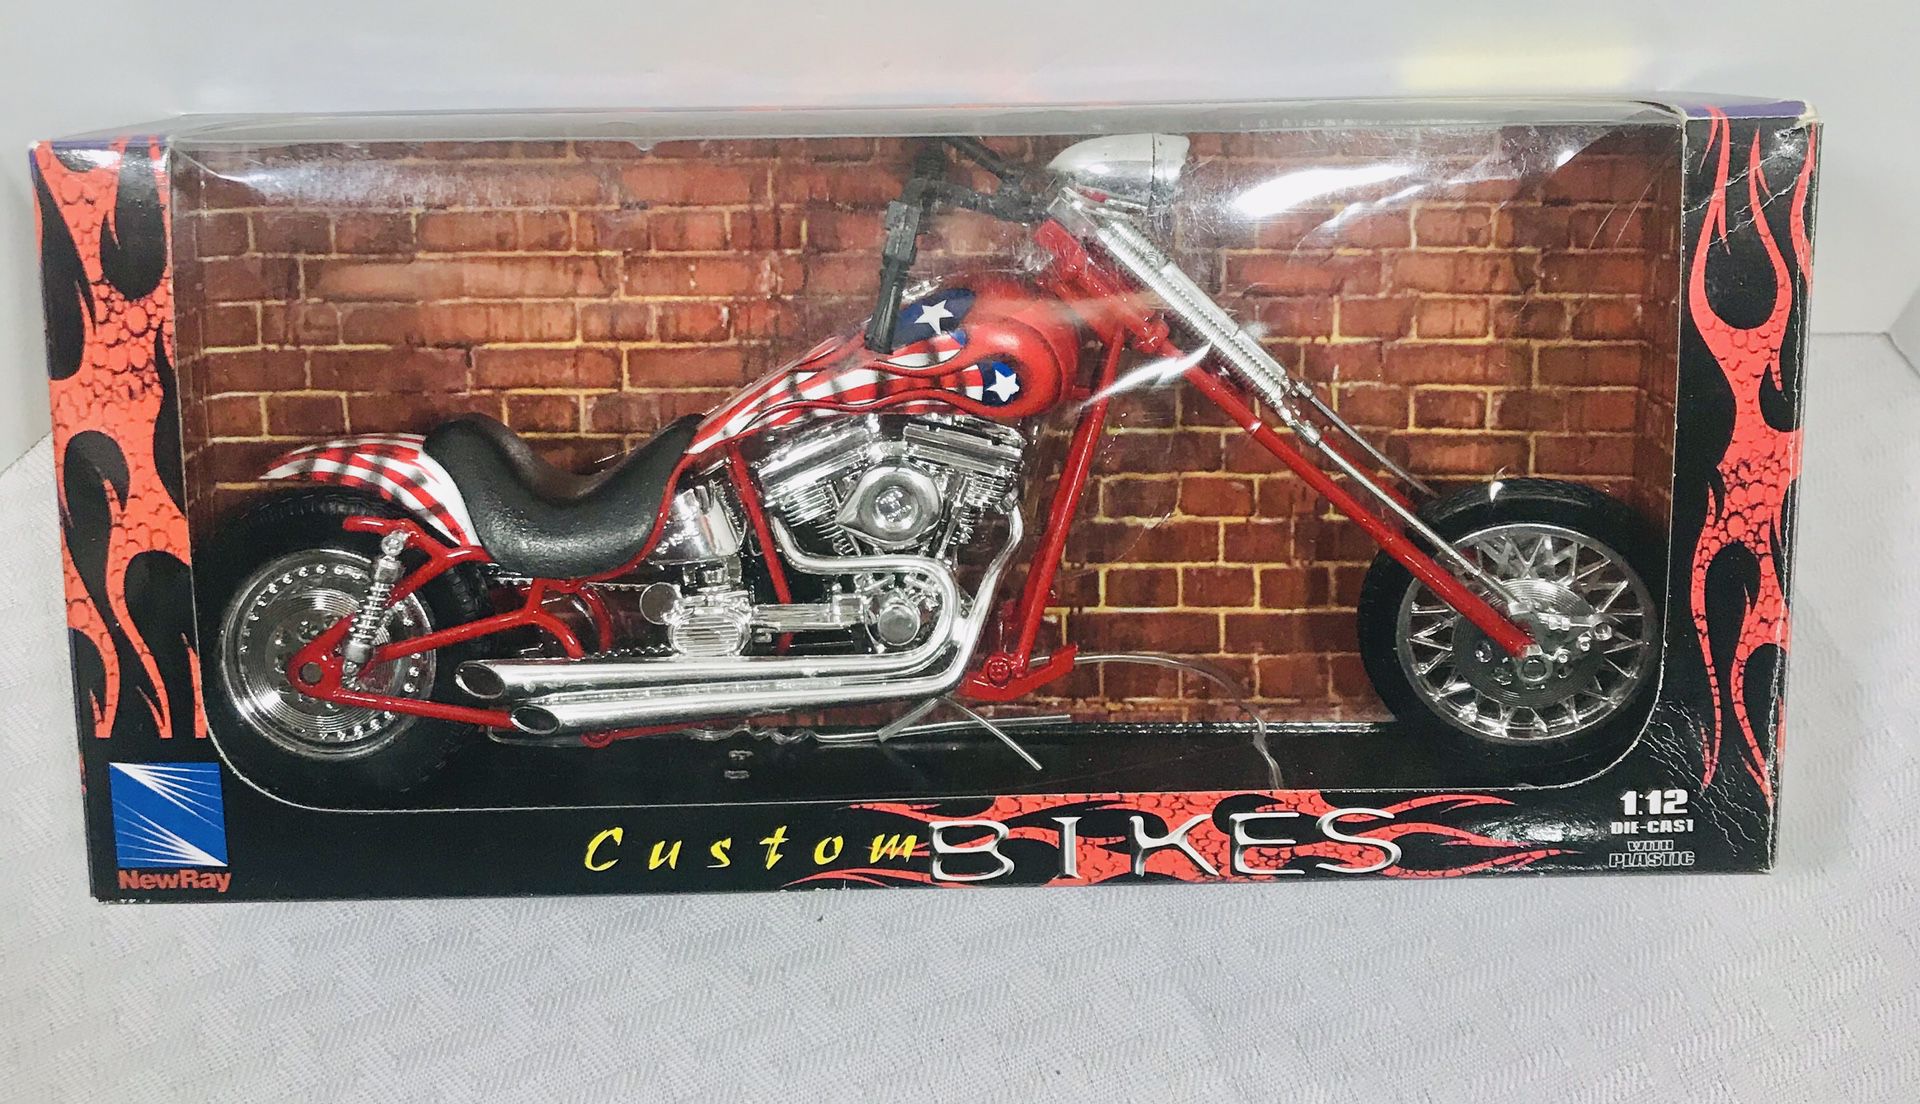 New Rays Toys Custom Bikes Motorcycle 1/12 Scale